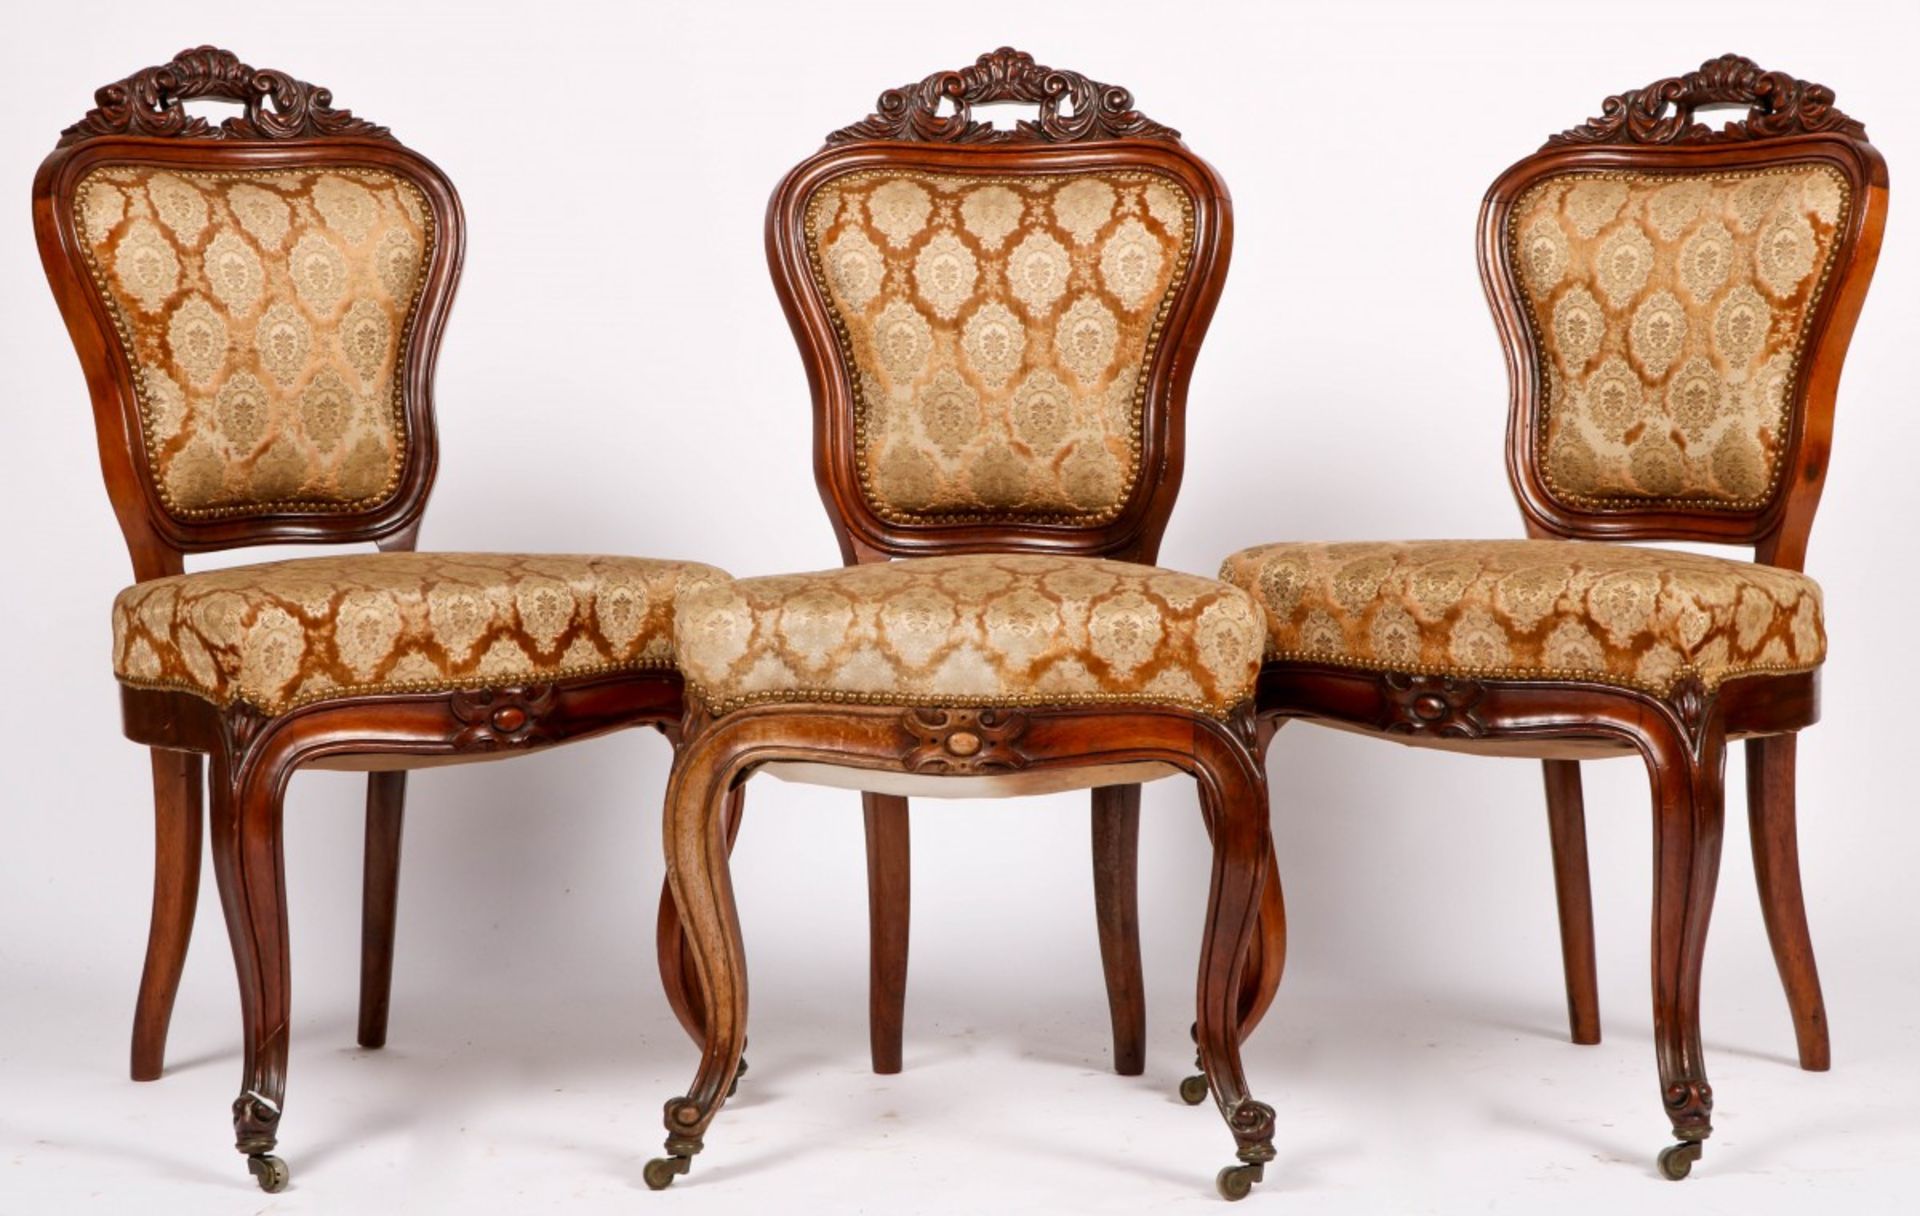 A set of (3) Victorian-/ Willem III dining chairs, Dutch, ca. 1880.